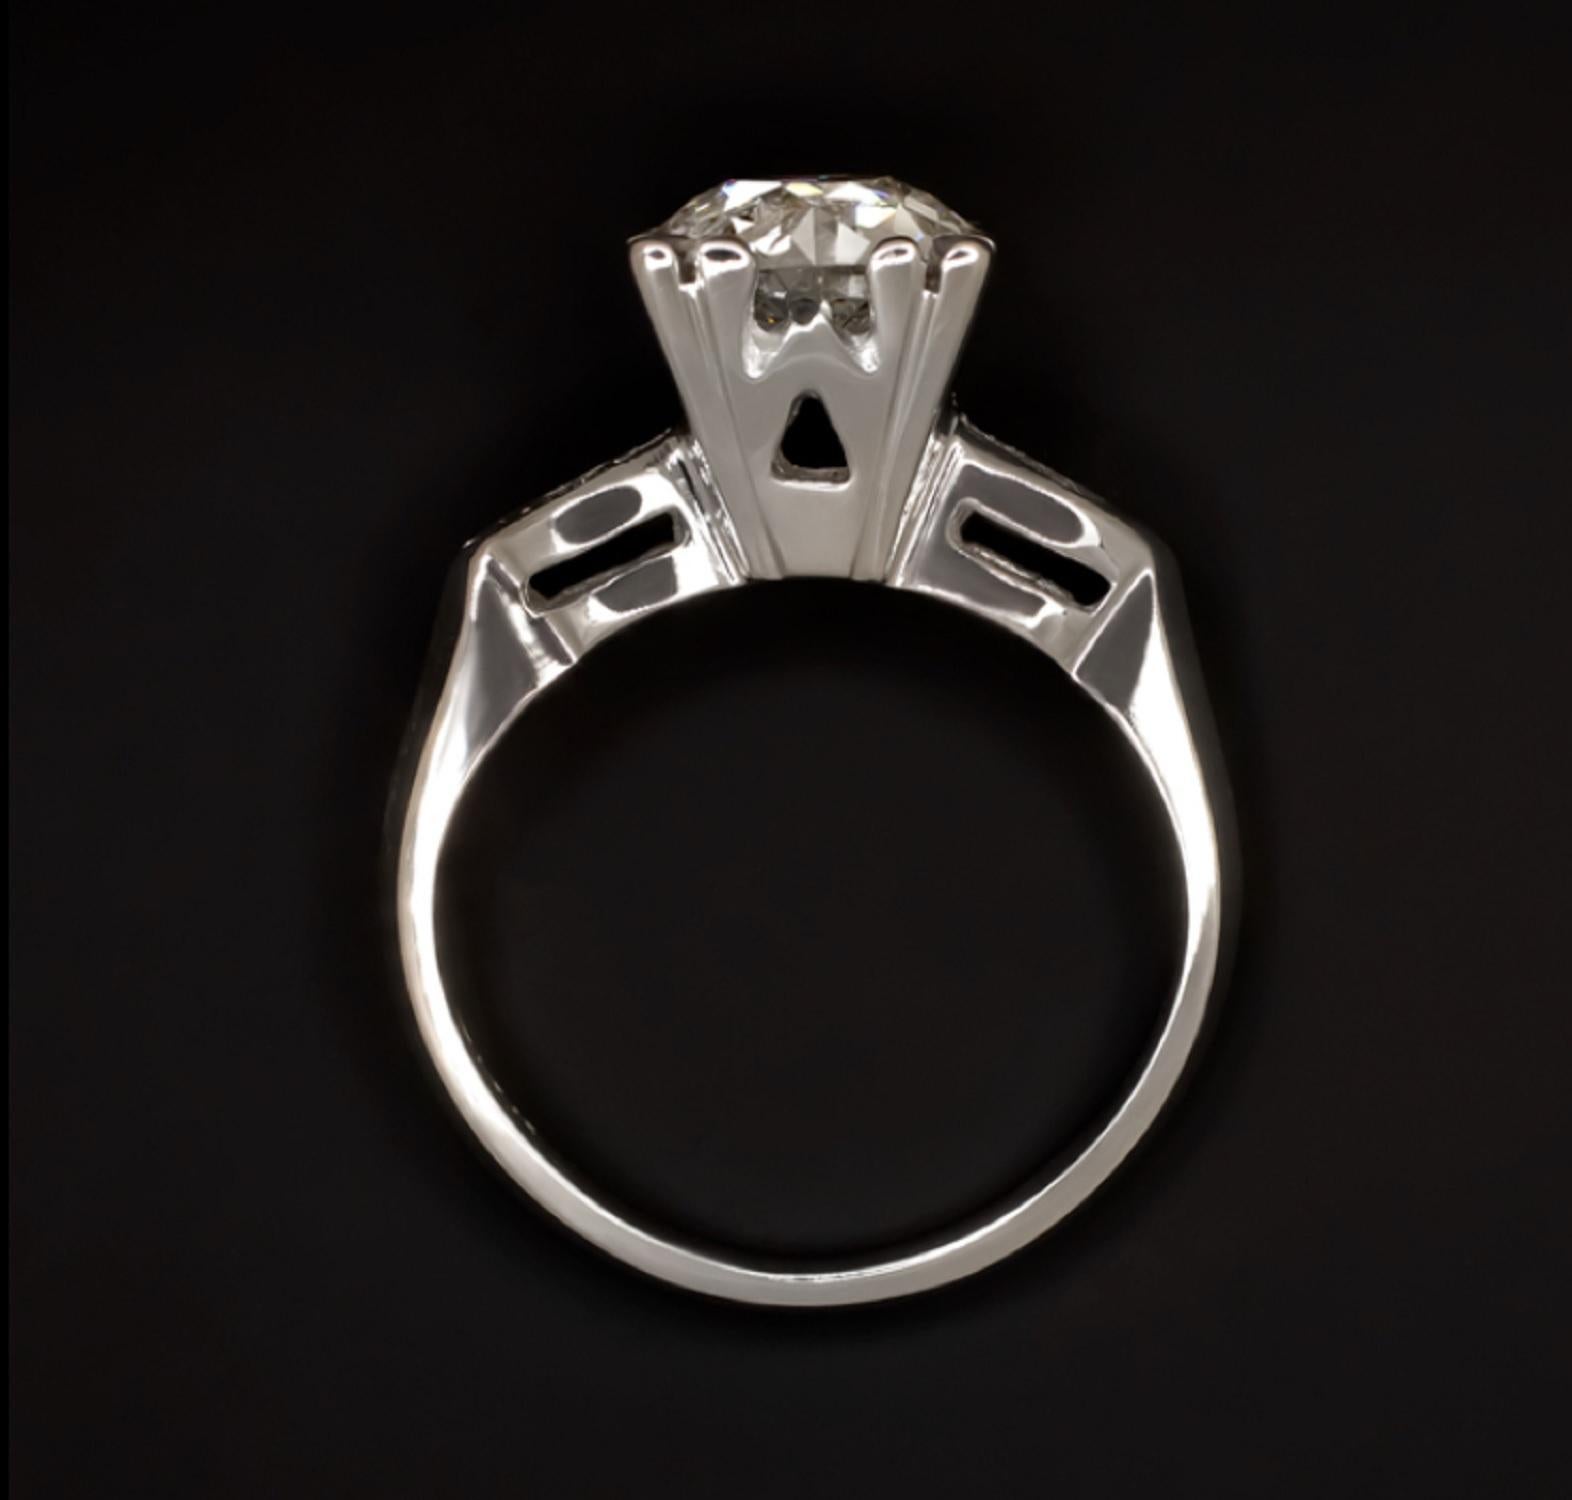  A vintage engagement ring is dazzling with brilliant sparkle and beautifully crafted with simple yet elegant details. The impressively large 1.75ct old European cut center diamond is vibrant, and bright white, a rarity in diamonds from its time